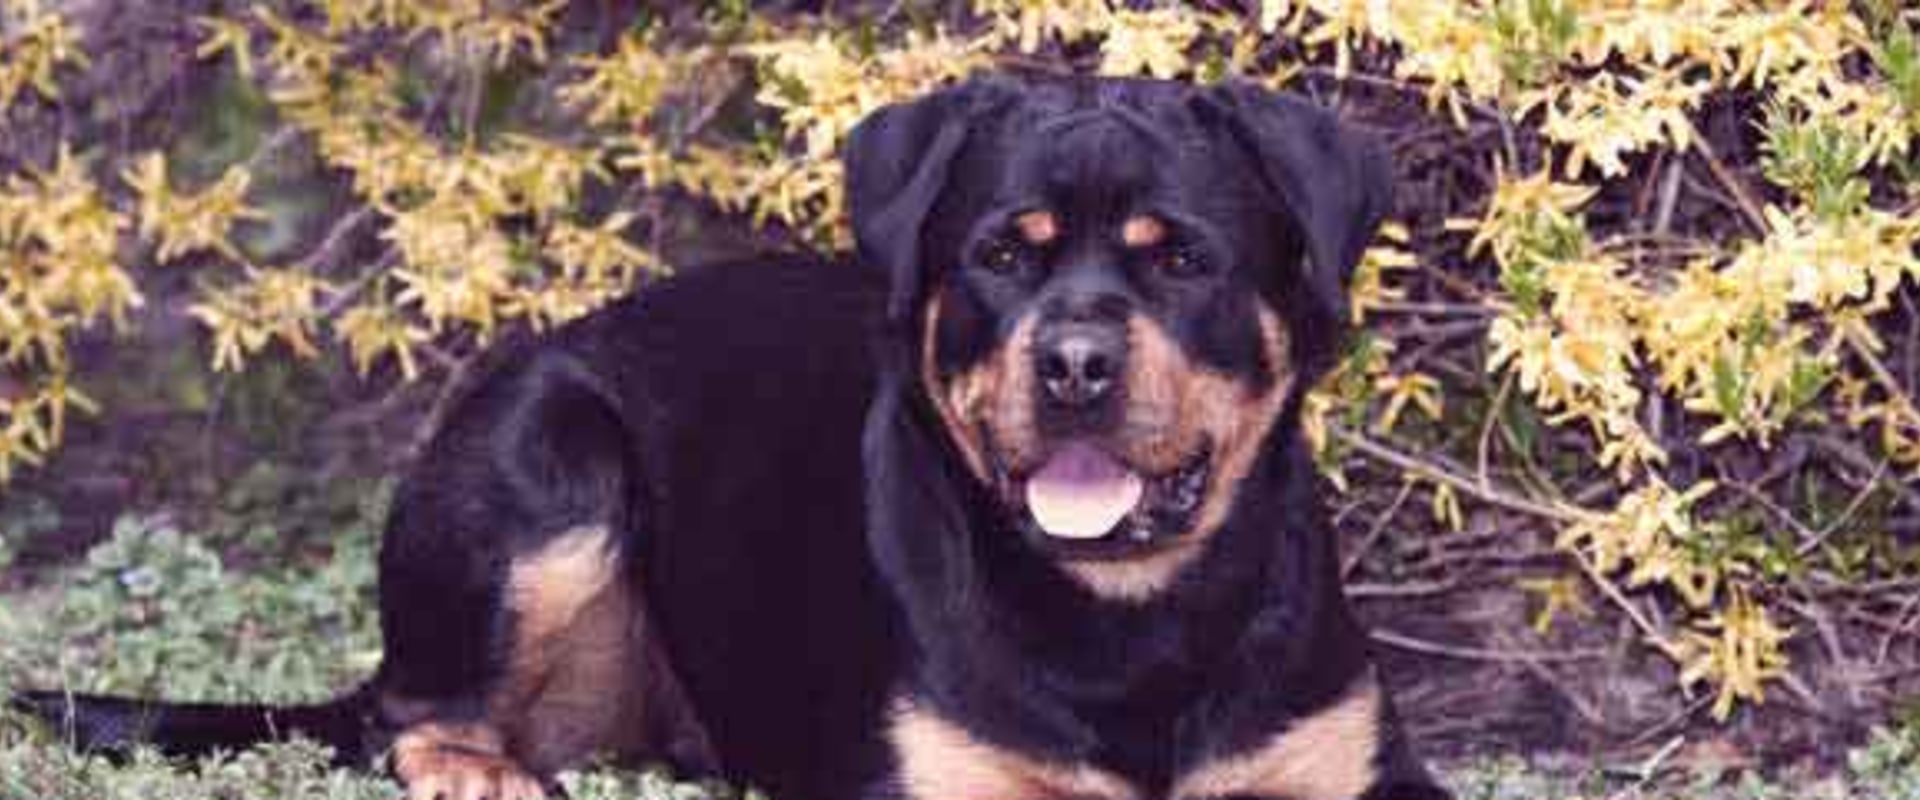 What rottweilers should not eat?